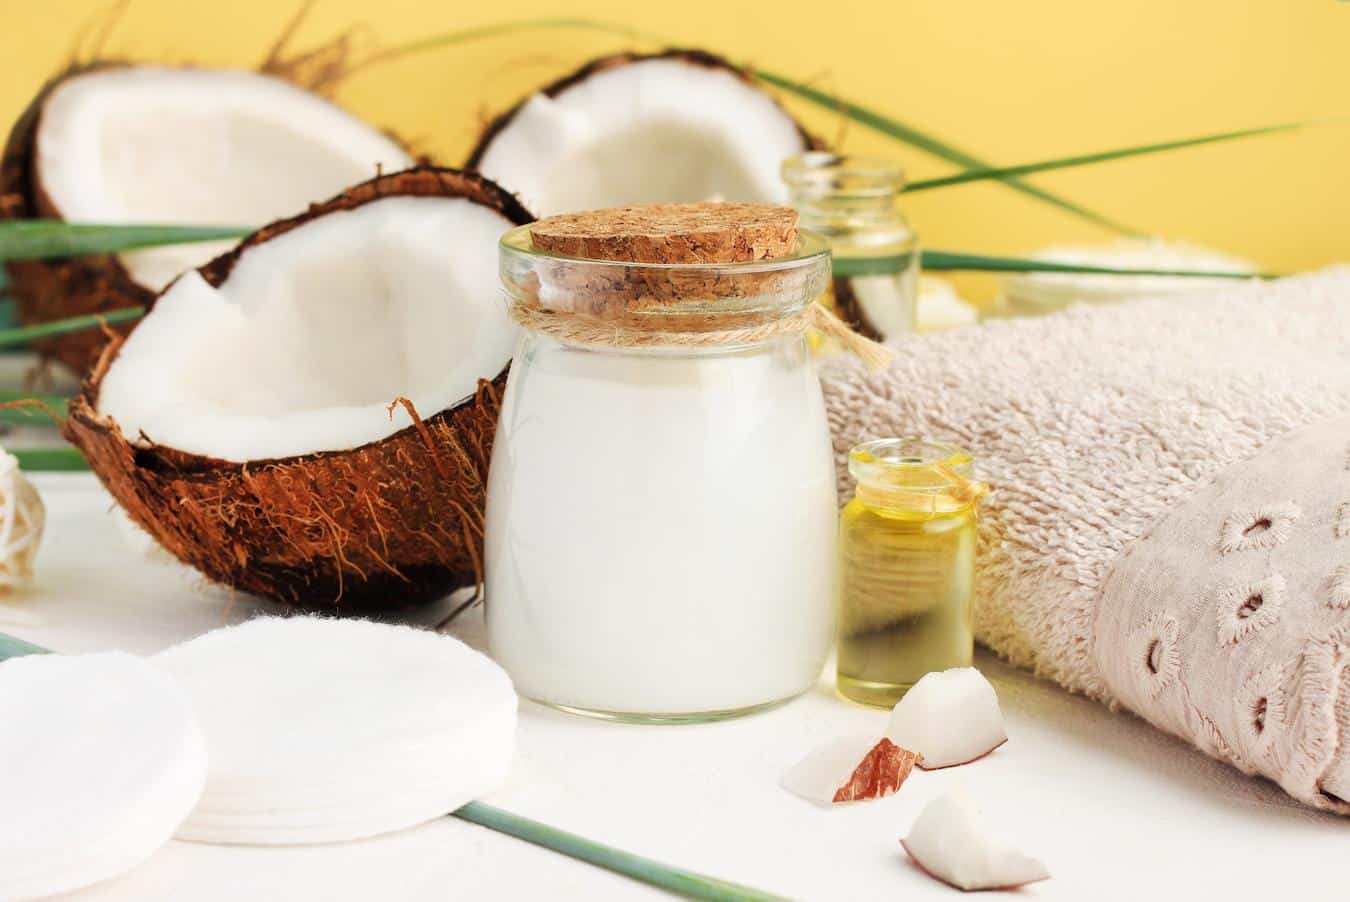 coconut oil is great for deep conditioning treatment